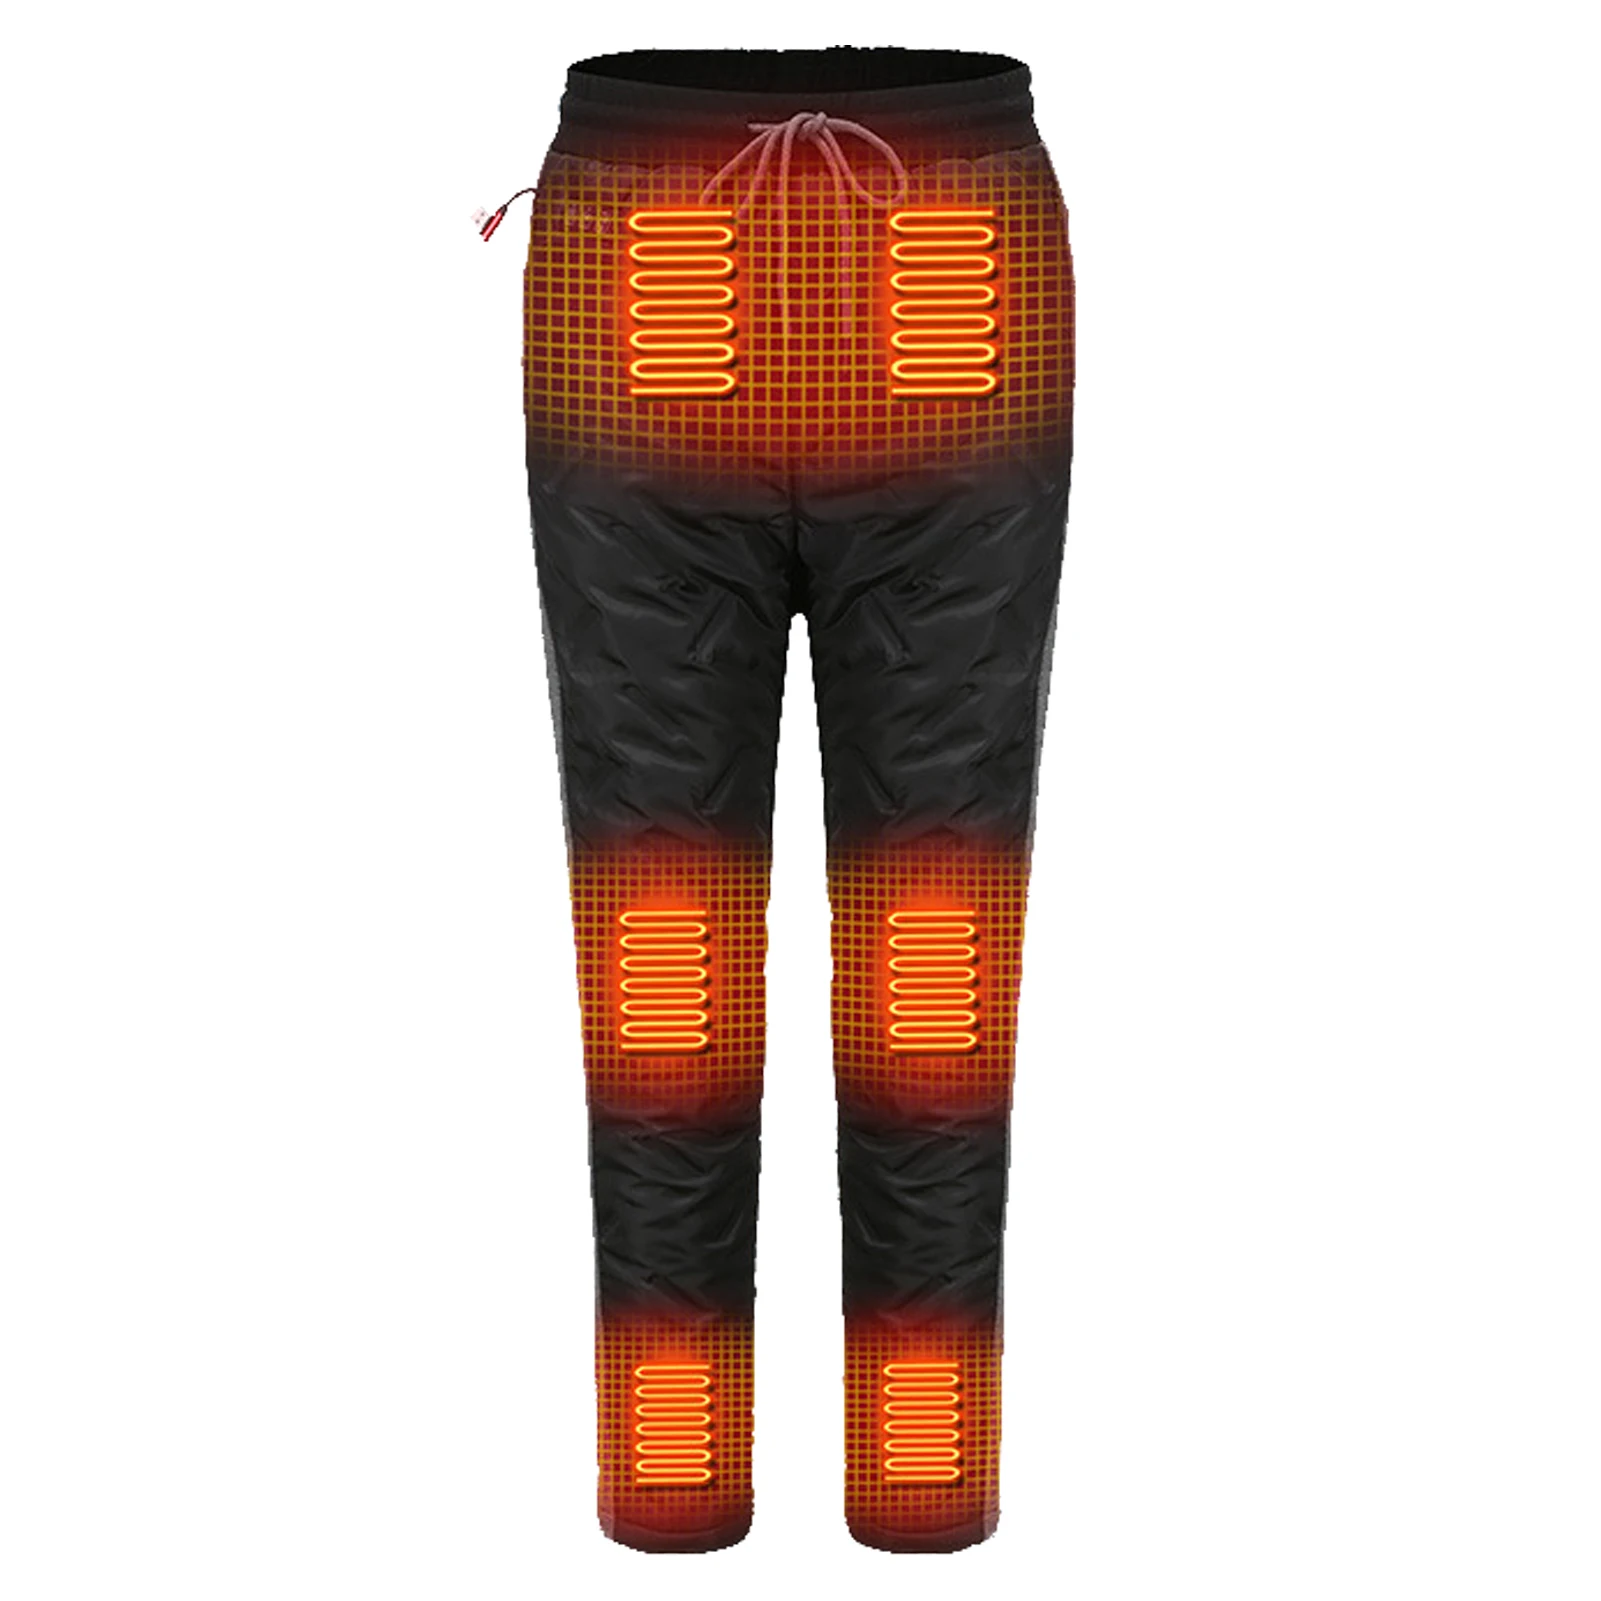 Winter Heated Pants 8 Zone Temperature Contro Electric Heating